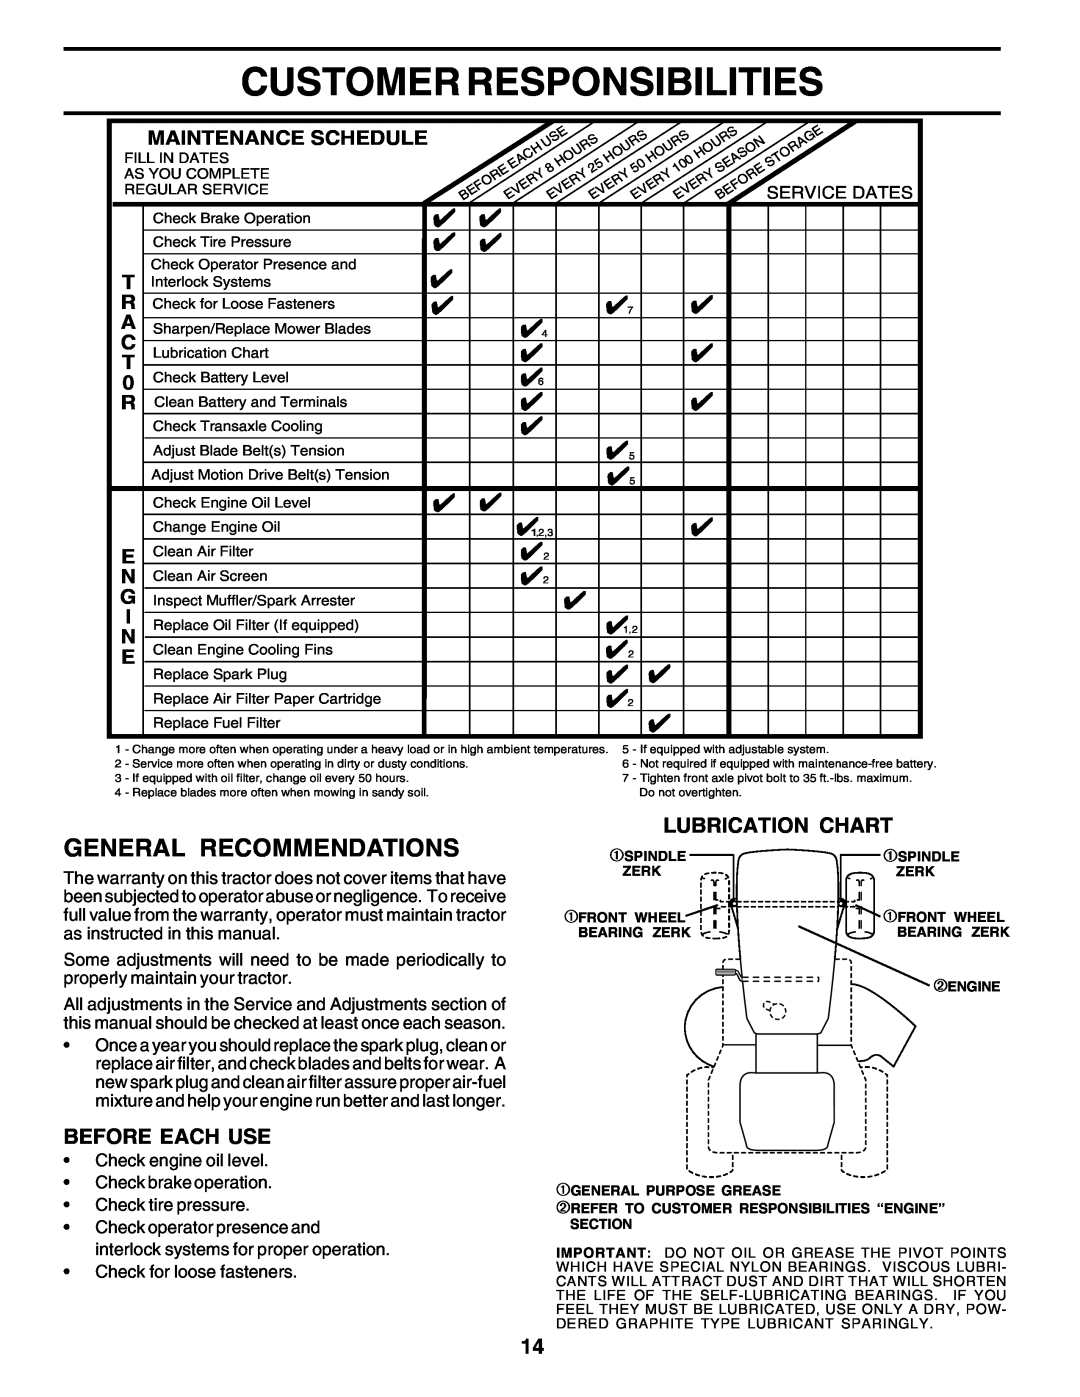 Poulan PO14542B owner manual Customer Responsibilities, General Recommendations, Before Each Use, ¿ Lubrication Chart 